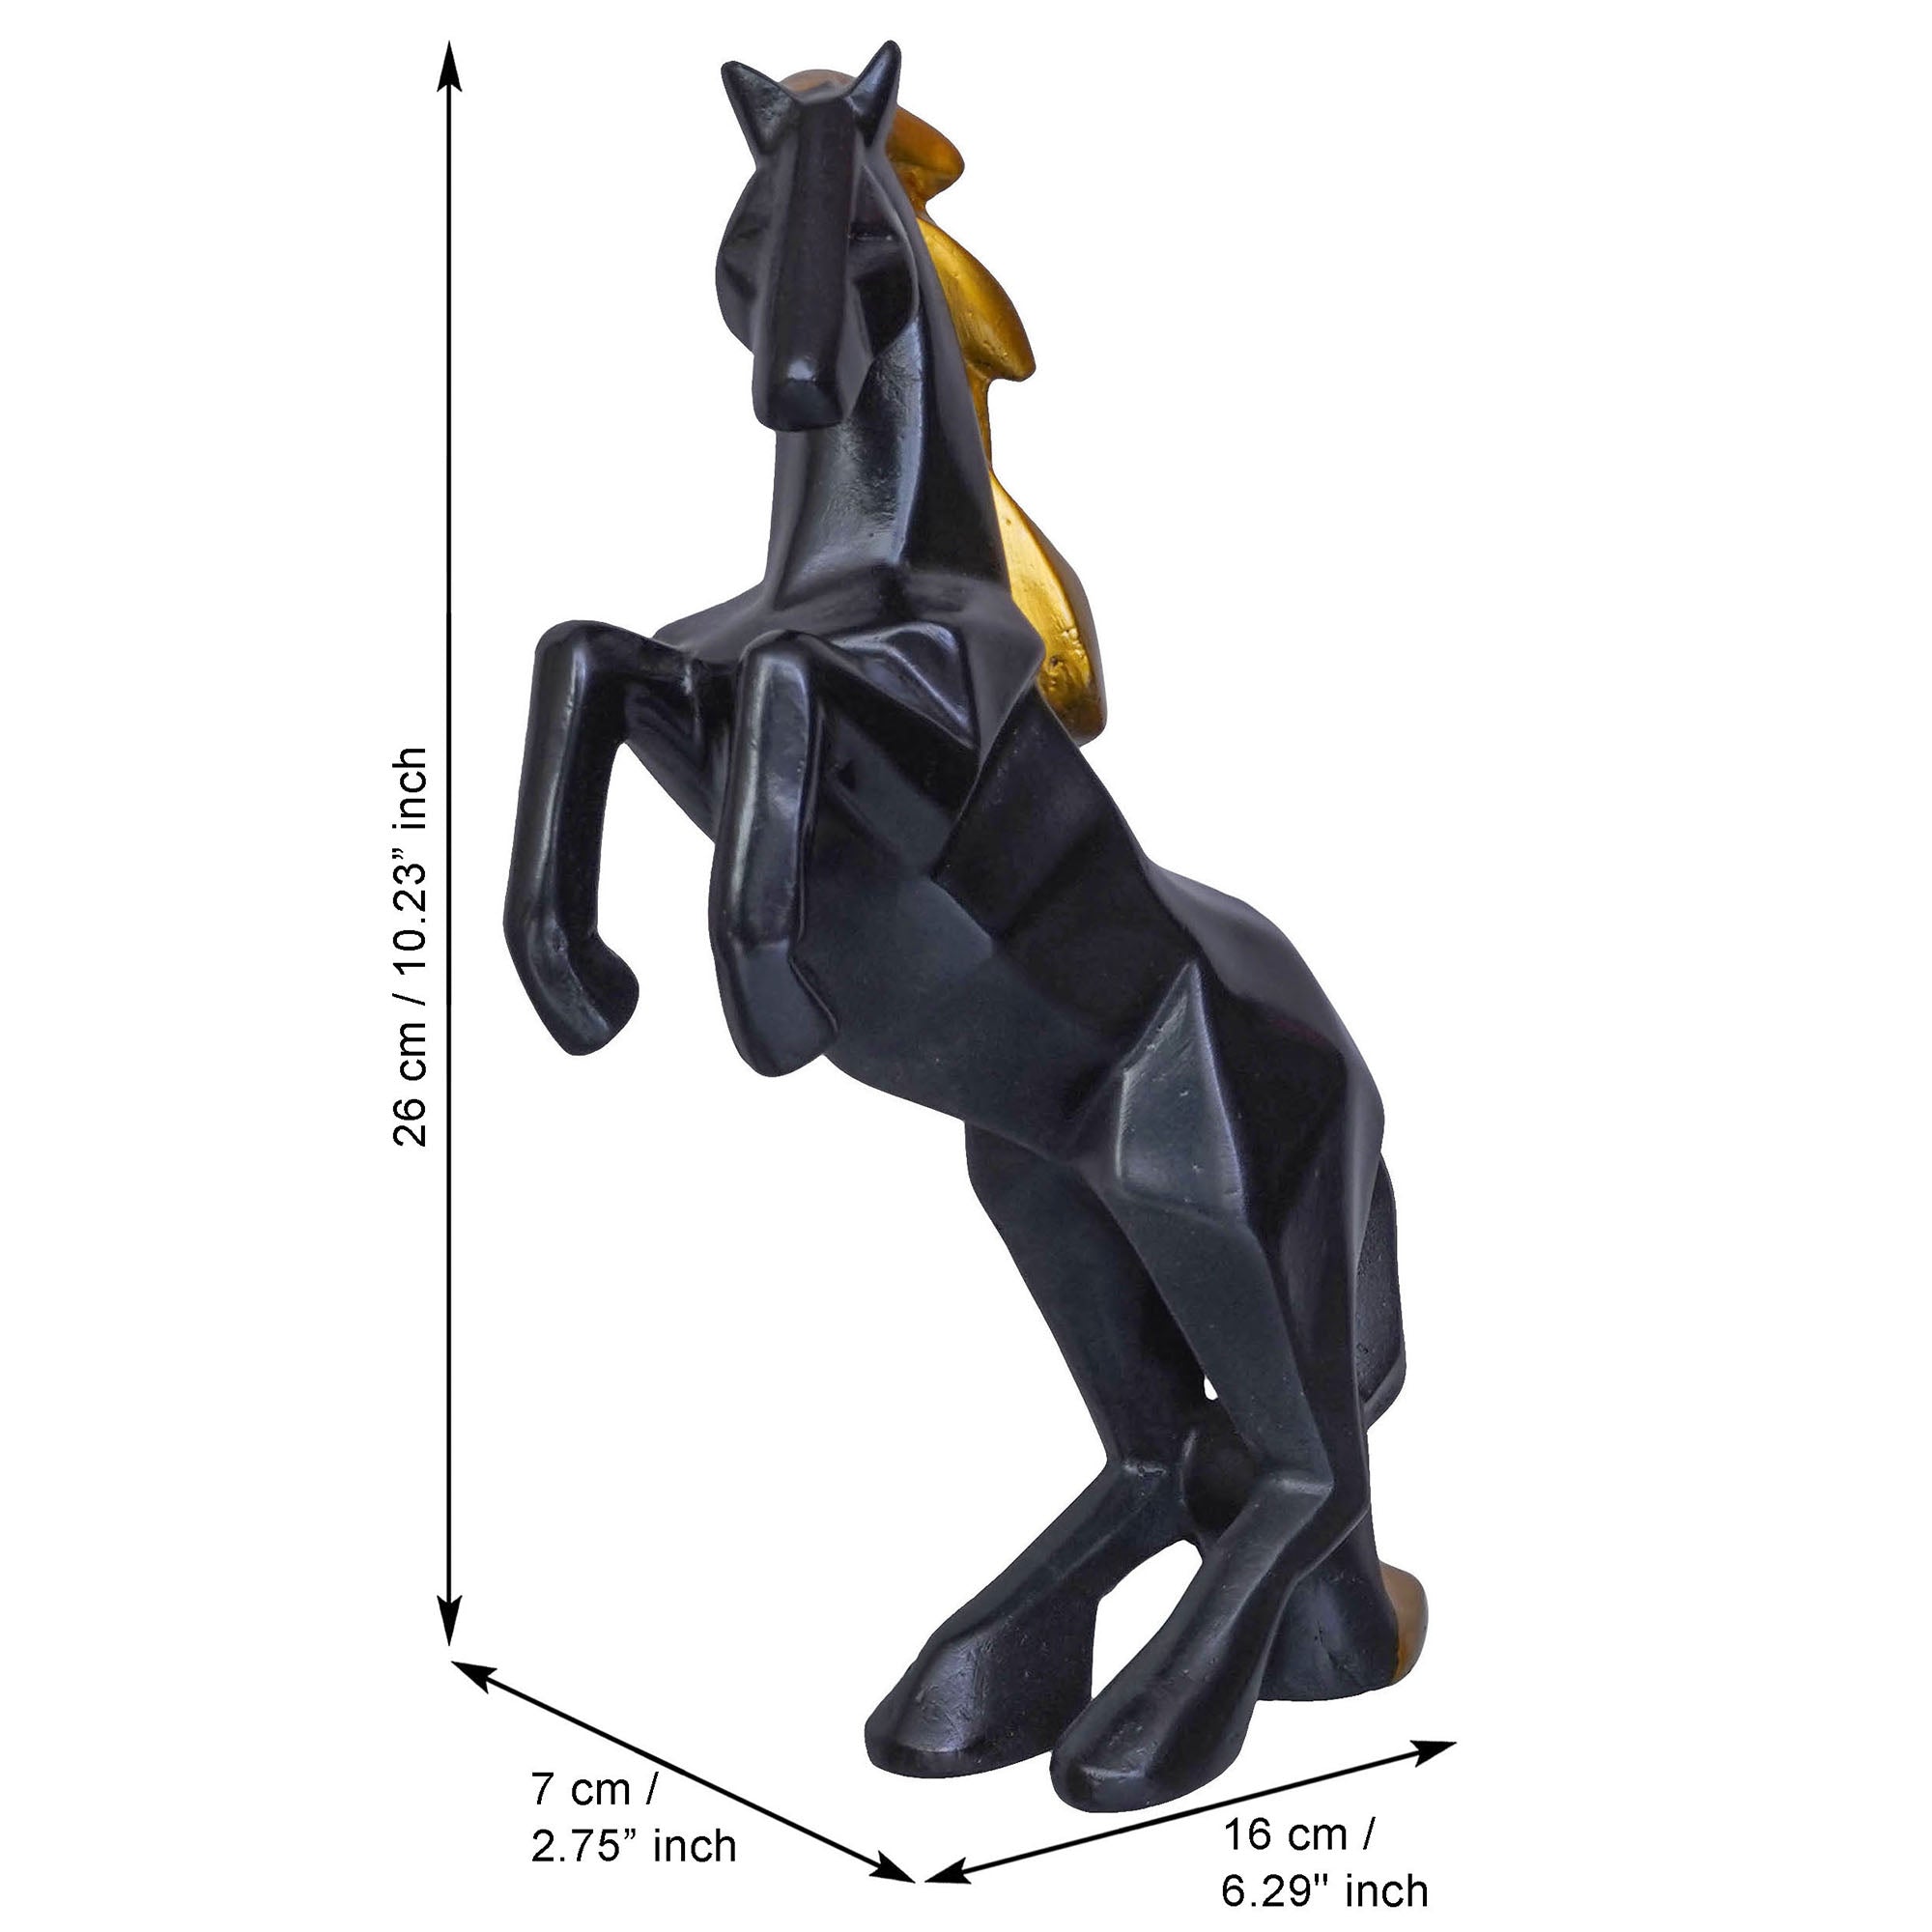 Black Polyresin Jumping Horse Statue with Golden Hair Animal Figurine 3